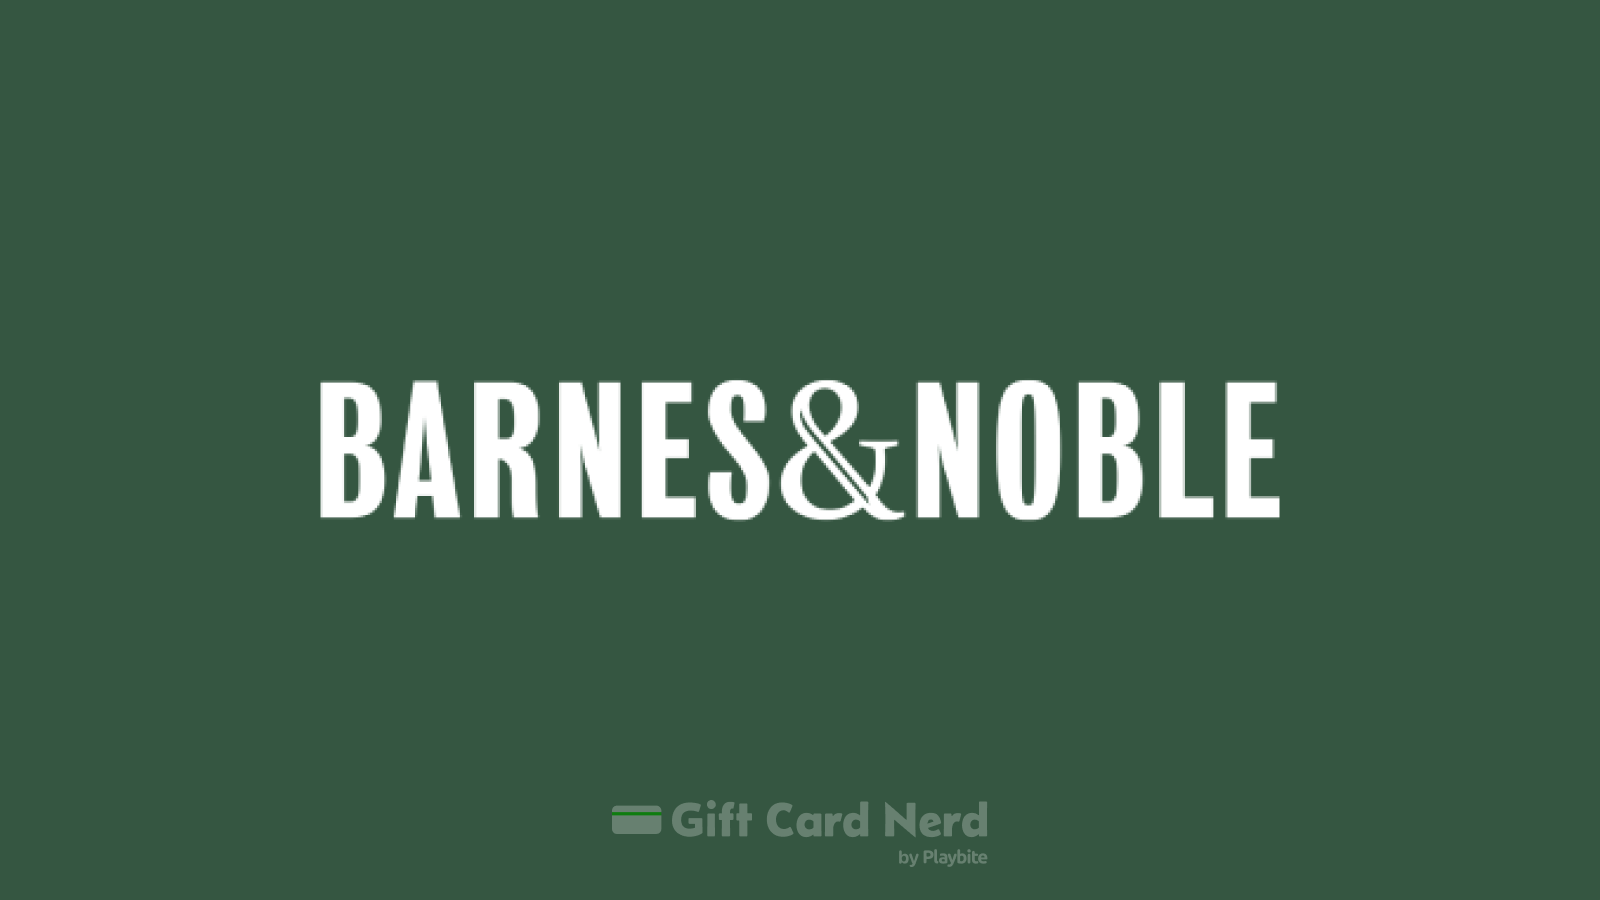 Can You Find Barnes and Noble Gift Cards on Amazon?